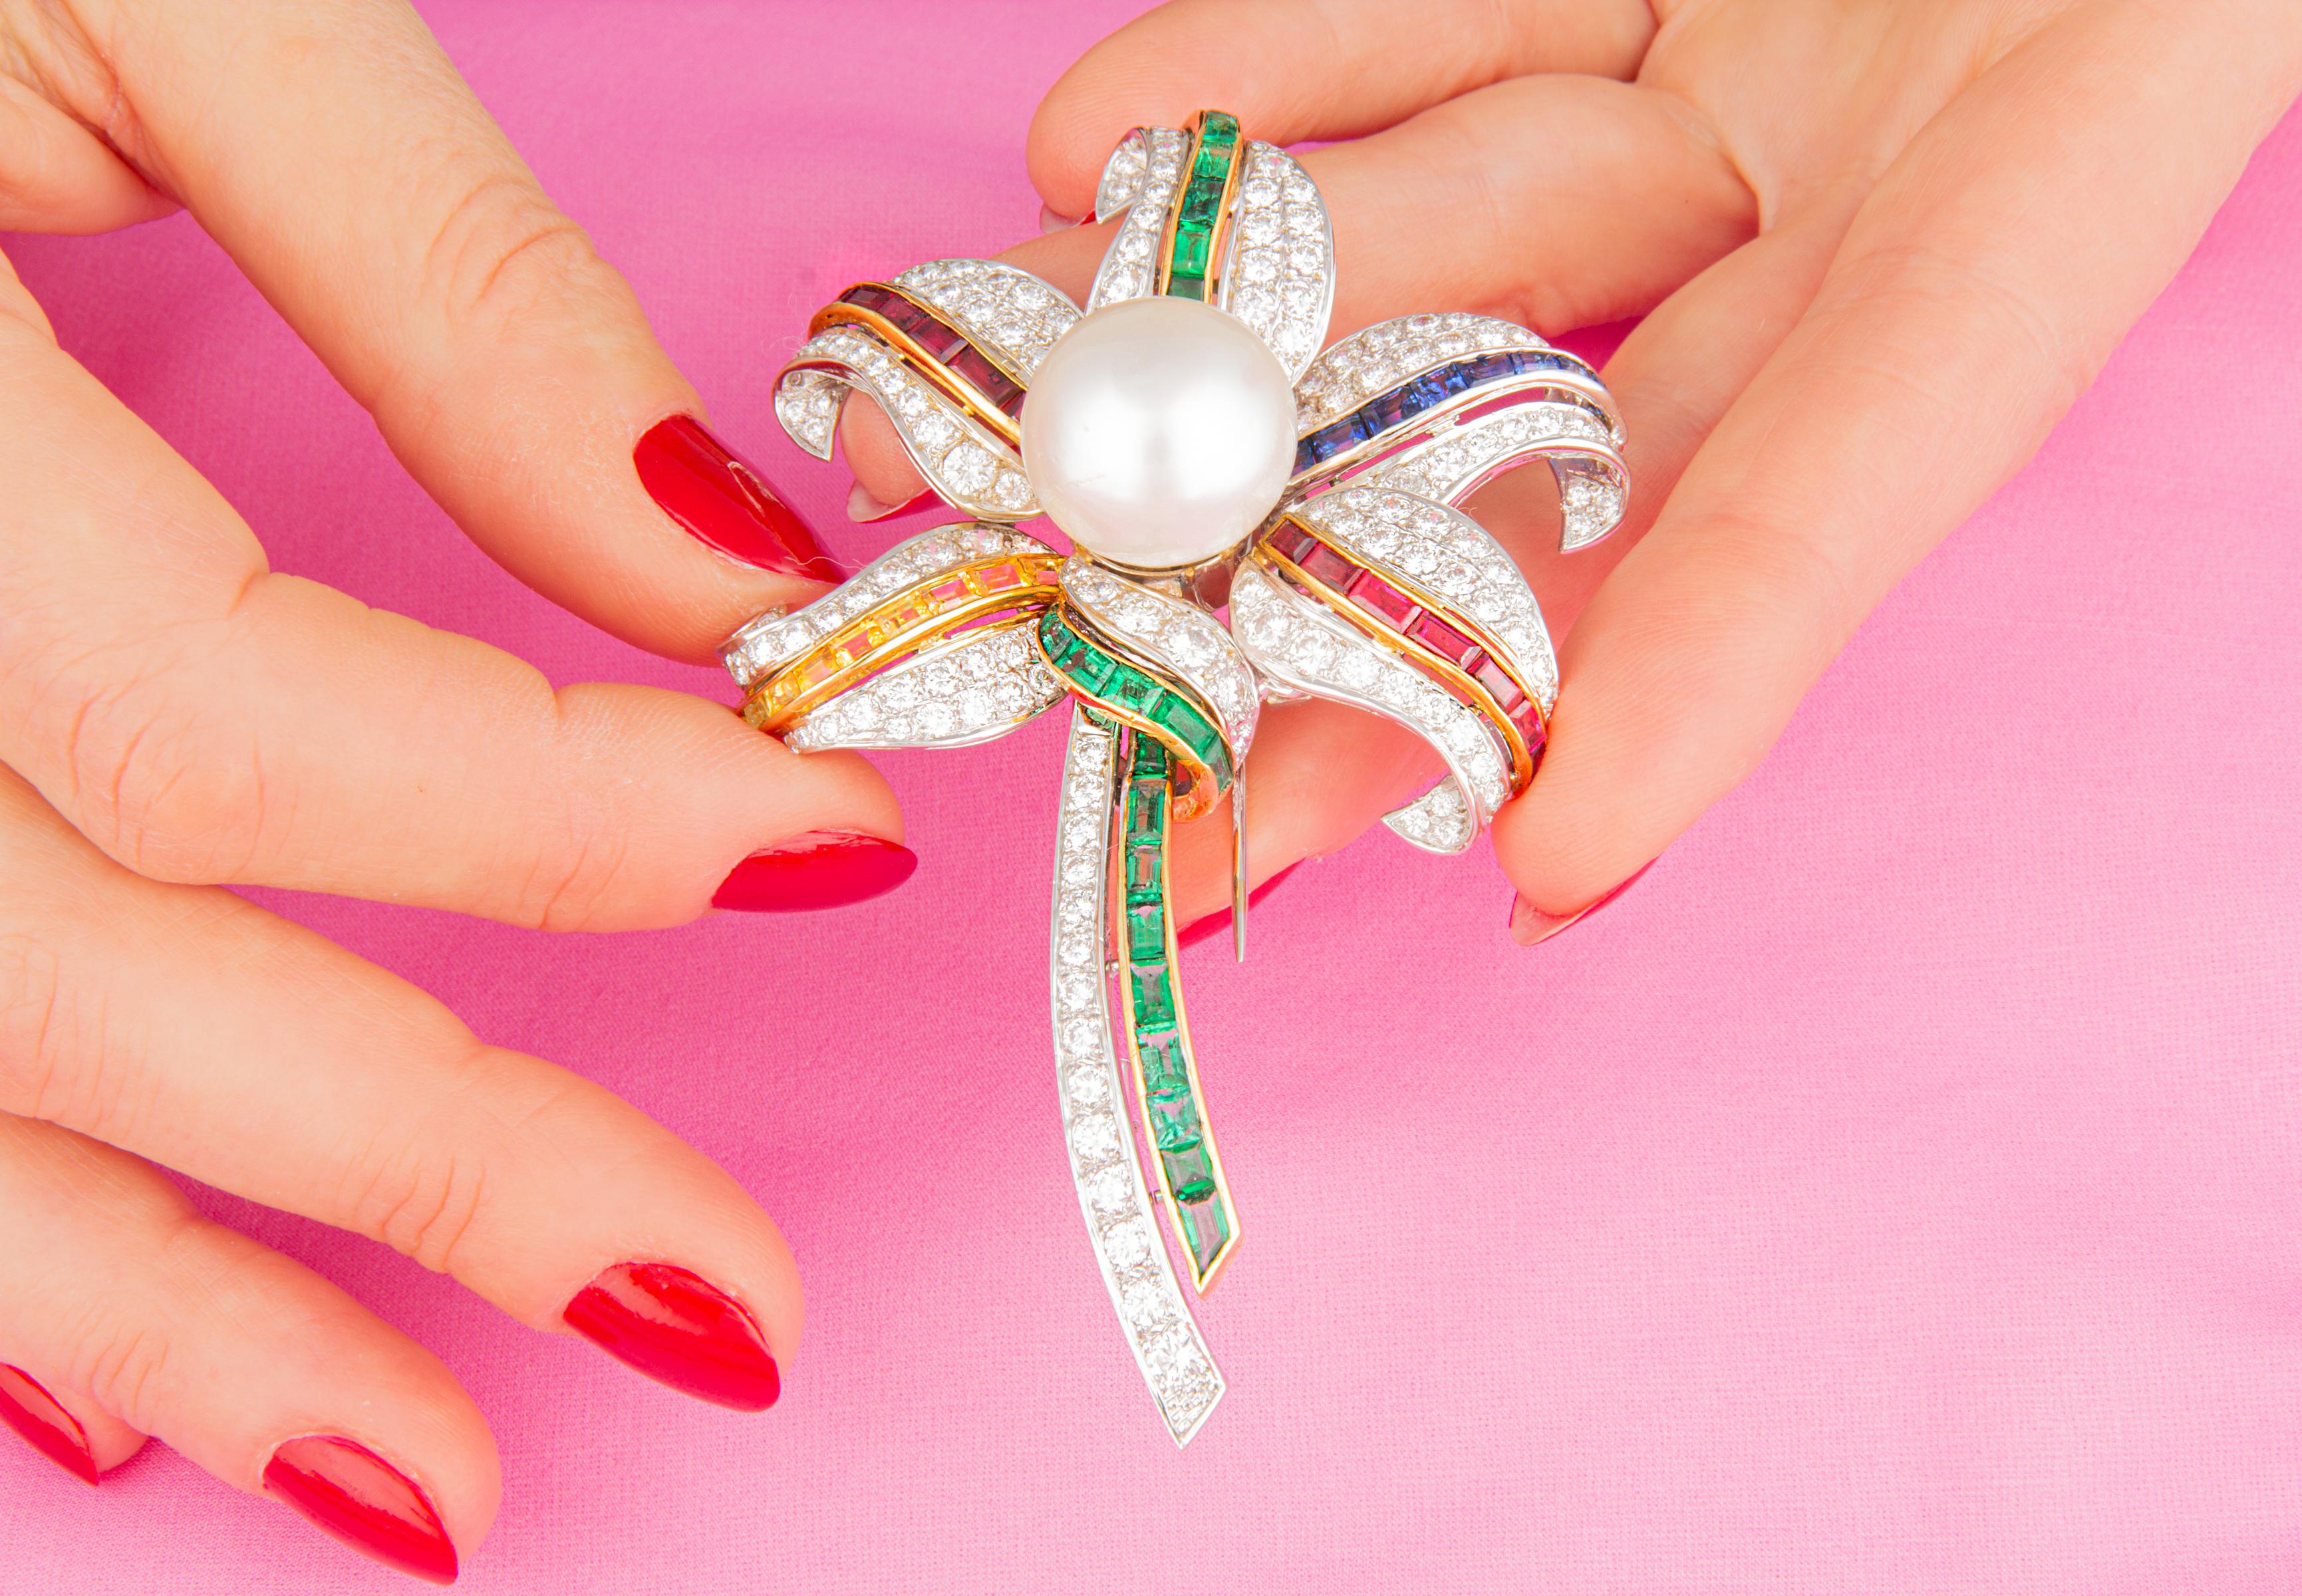 The flower diamond brooch features five leaves or petals around a large and lustrous South Sea pearl. The leaves and stem are each accented by a ribbon of custom cut baguette shaped precious stones of fiery color: Emerald (3.40 carats), ruby (3.57